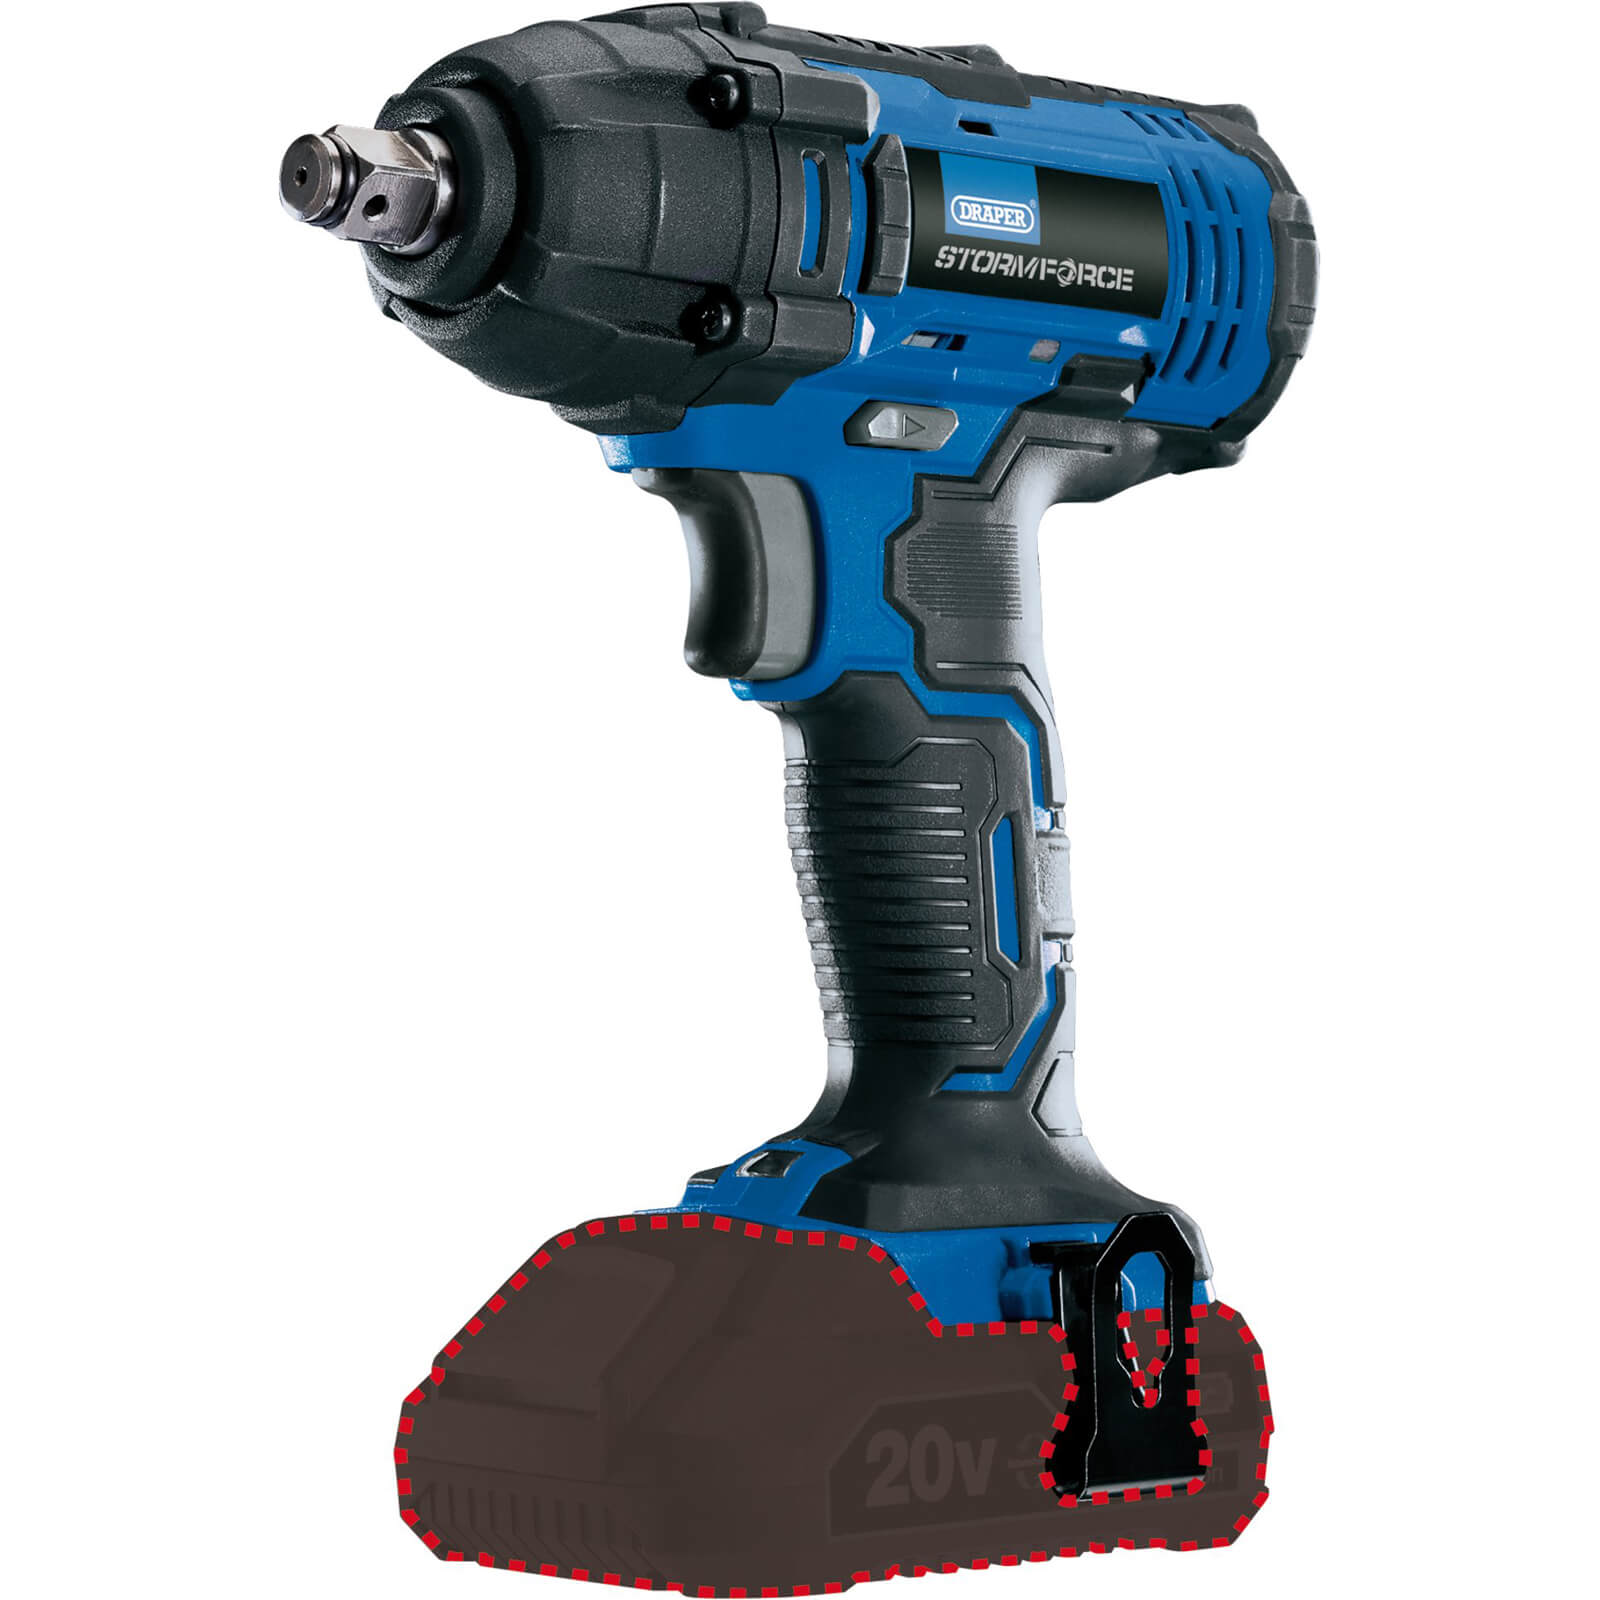 Image of Draper CIW20SF Storm Force 20V 1/2 Drive Impact Wrench No Batteries No Charger No Case